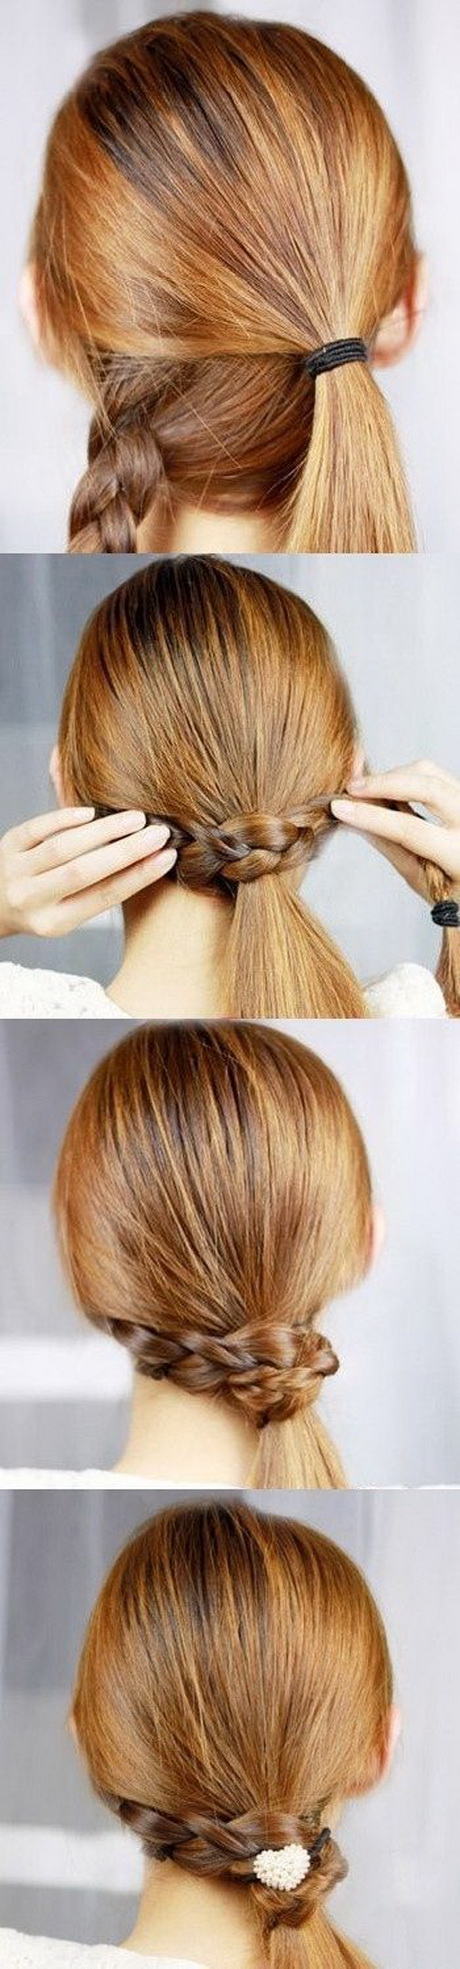 easy-to-do-hairstyles-for-long-hair-07-2 Easy to do hairstyles for long hair